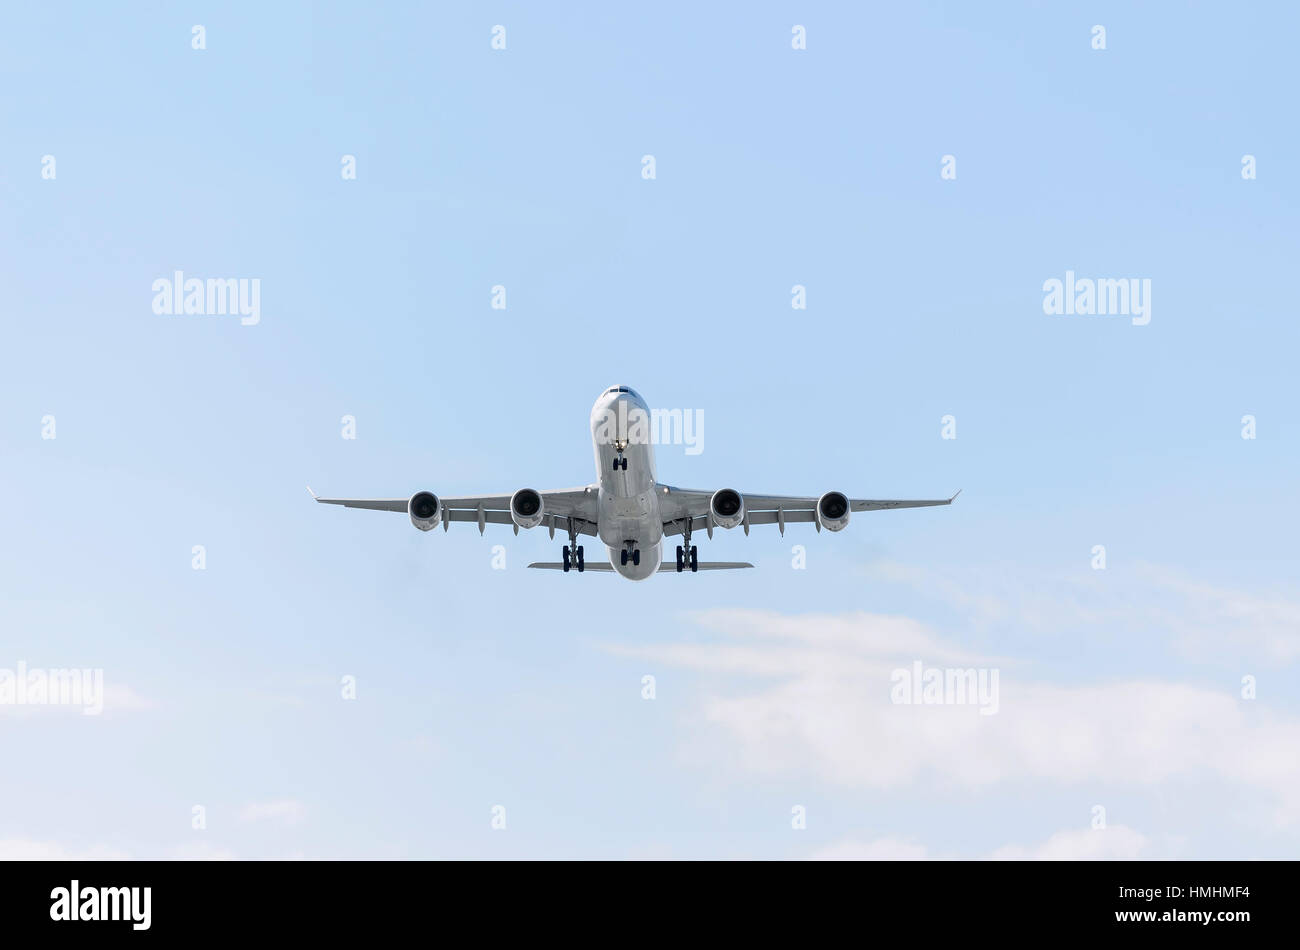 Airplane Airbus A340, of Iberia airline. Blue sky with some clouds. Stock Photo